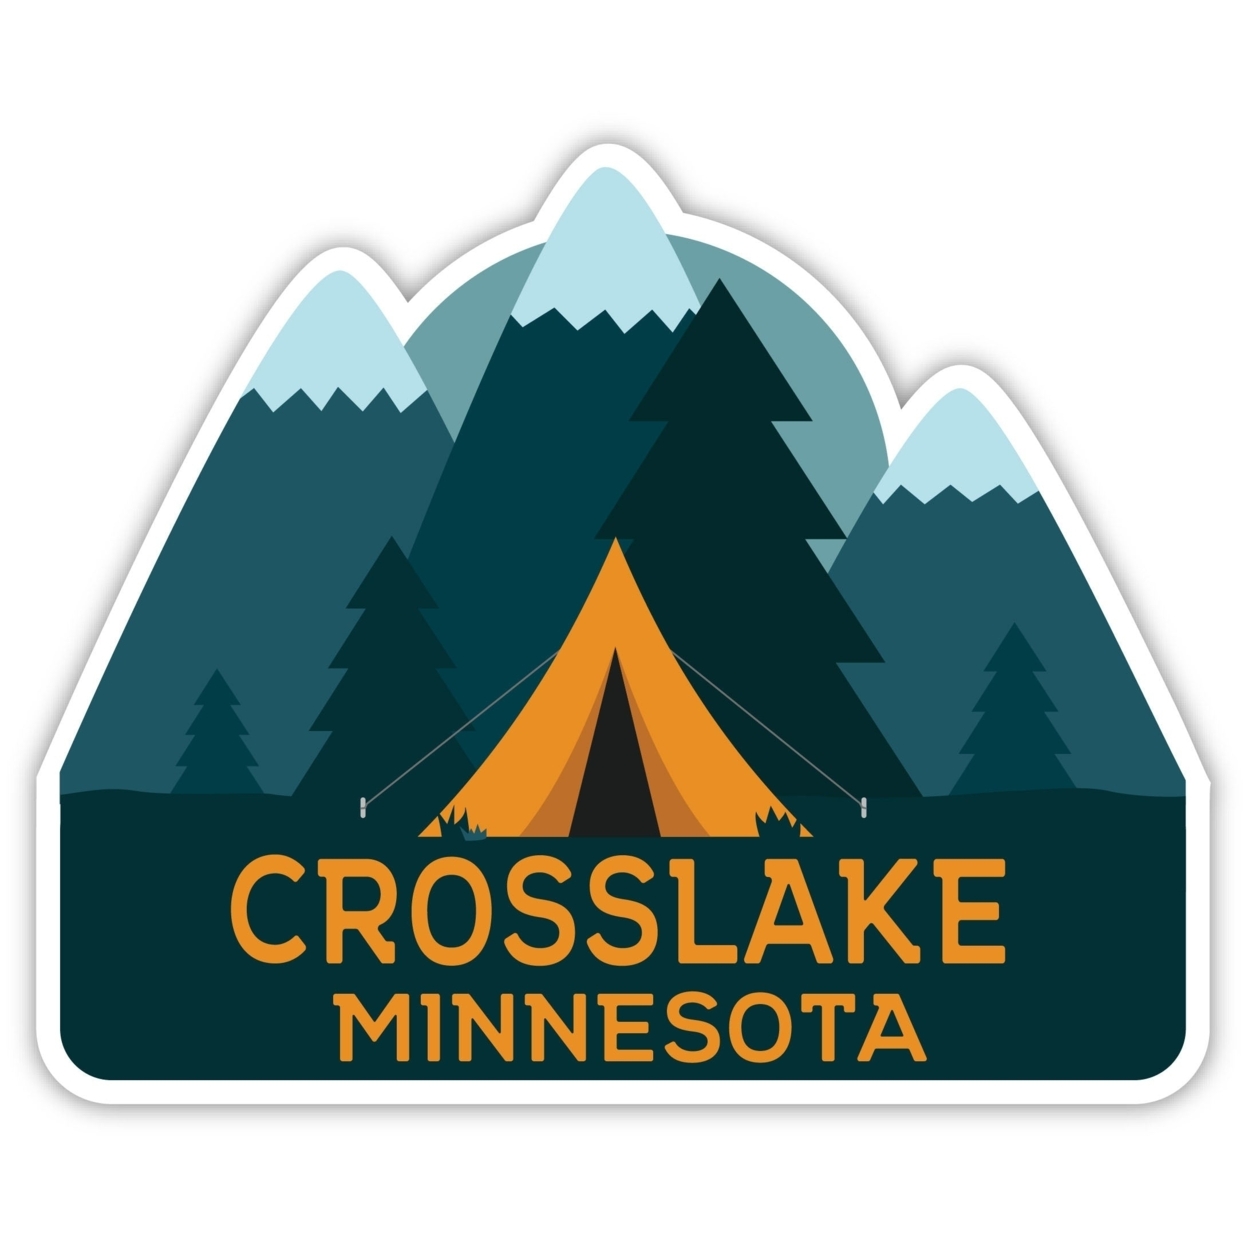 Crosslake Minnesota Souvenir Decorative Stickers (Choose Theme And Size) - 4-Pack, 8-Inch, Tent